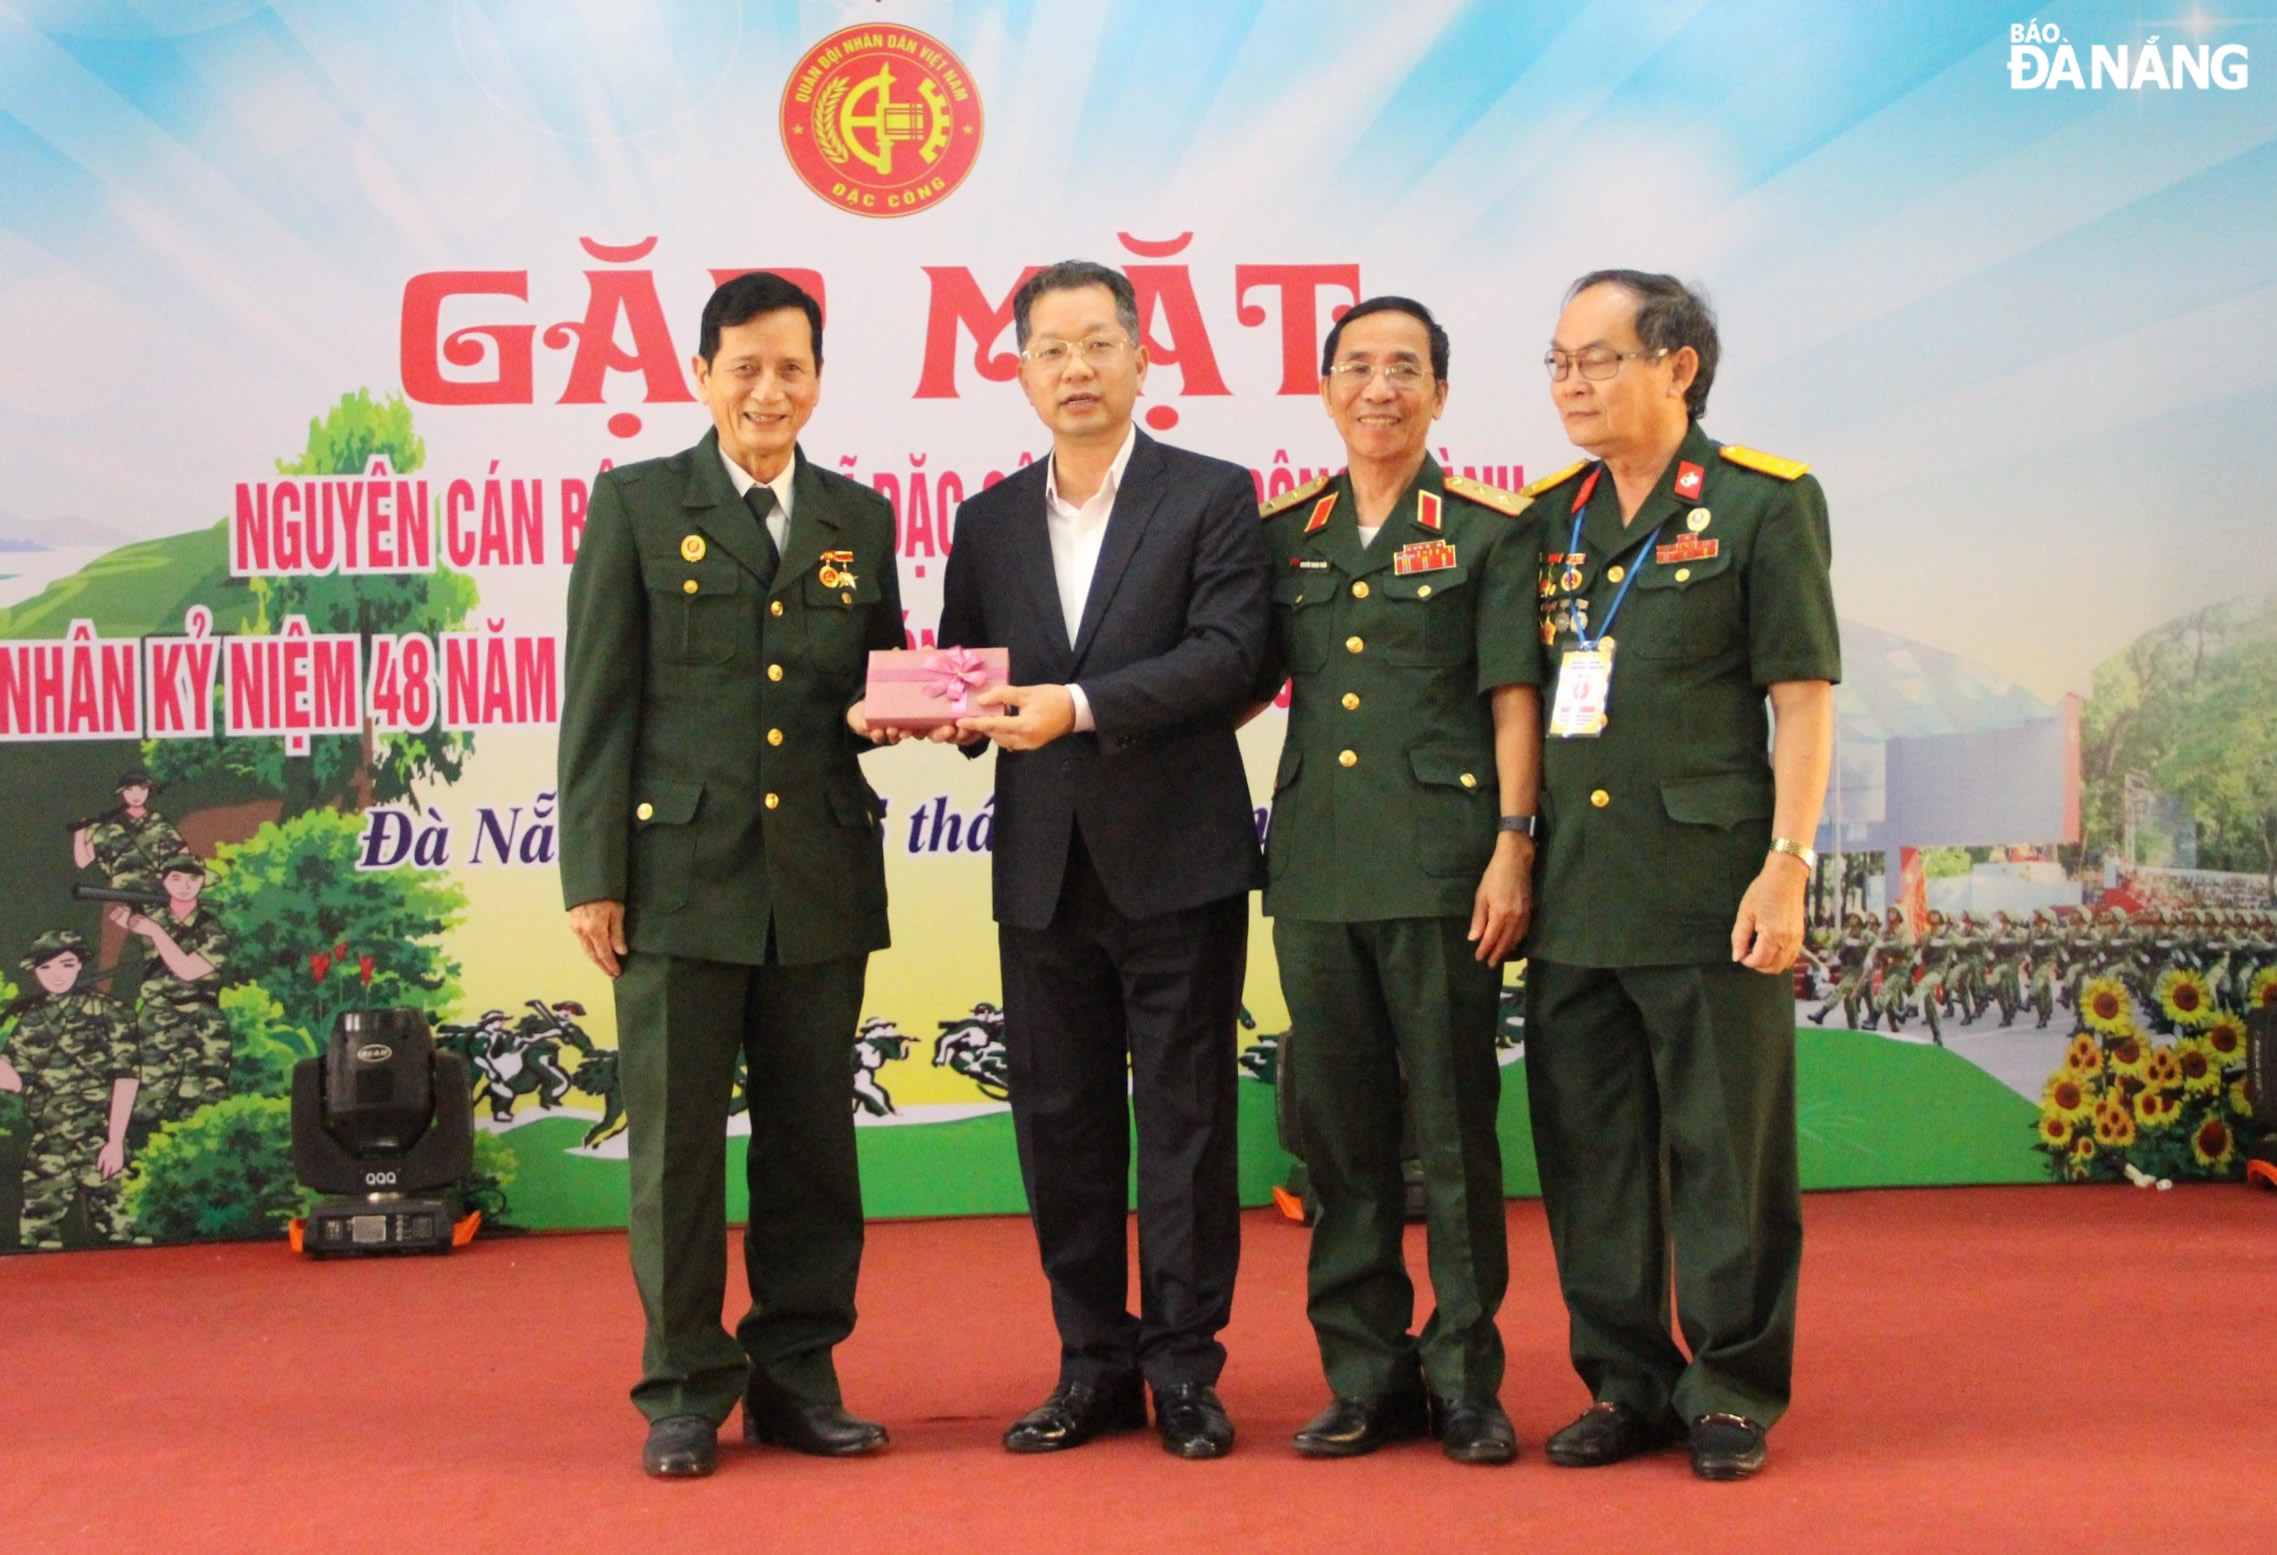 Secretary of the municipal Party Committee Nguyen Van Quang (second, left) presented a gift to the Traditional Liaison Board of the Da Nang Special Force. Photo: LE HUNG